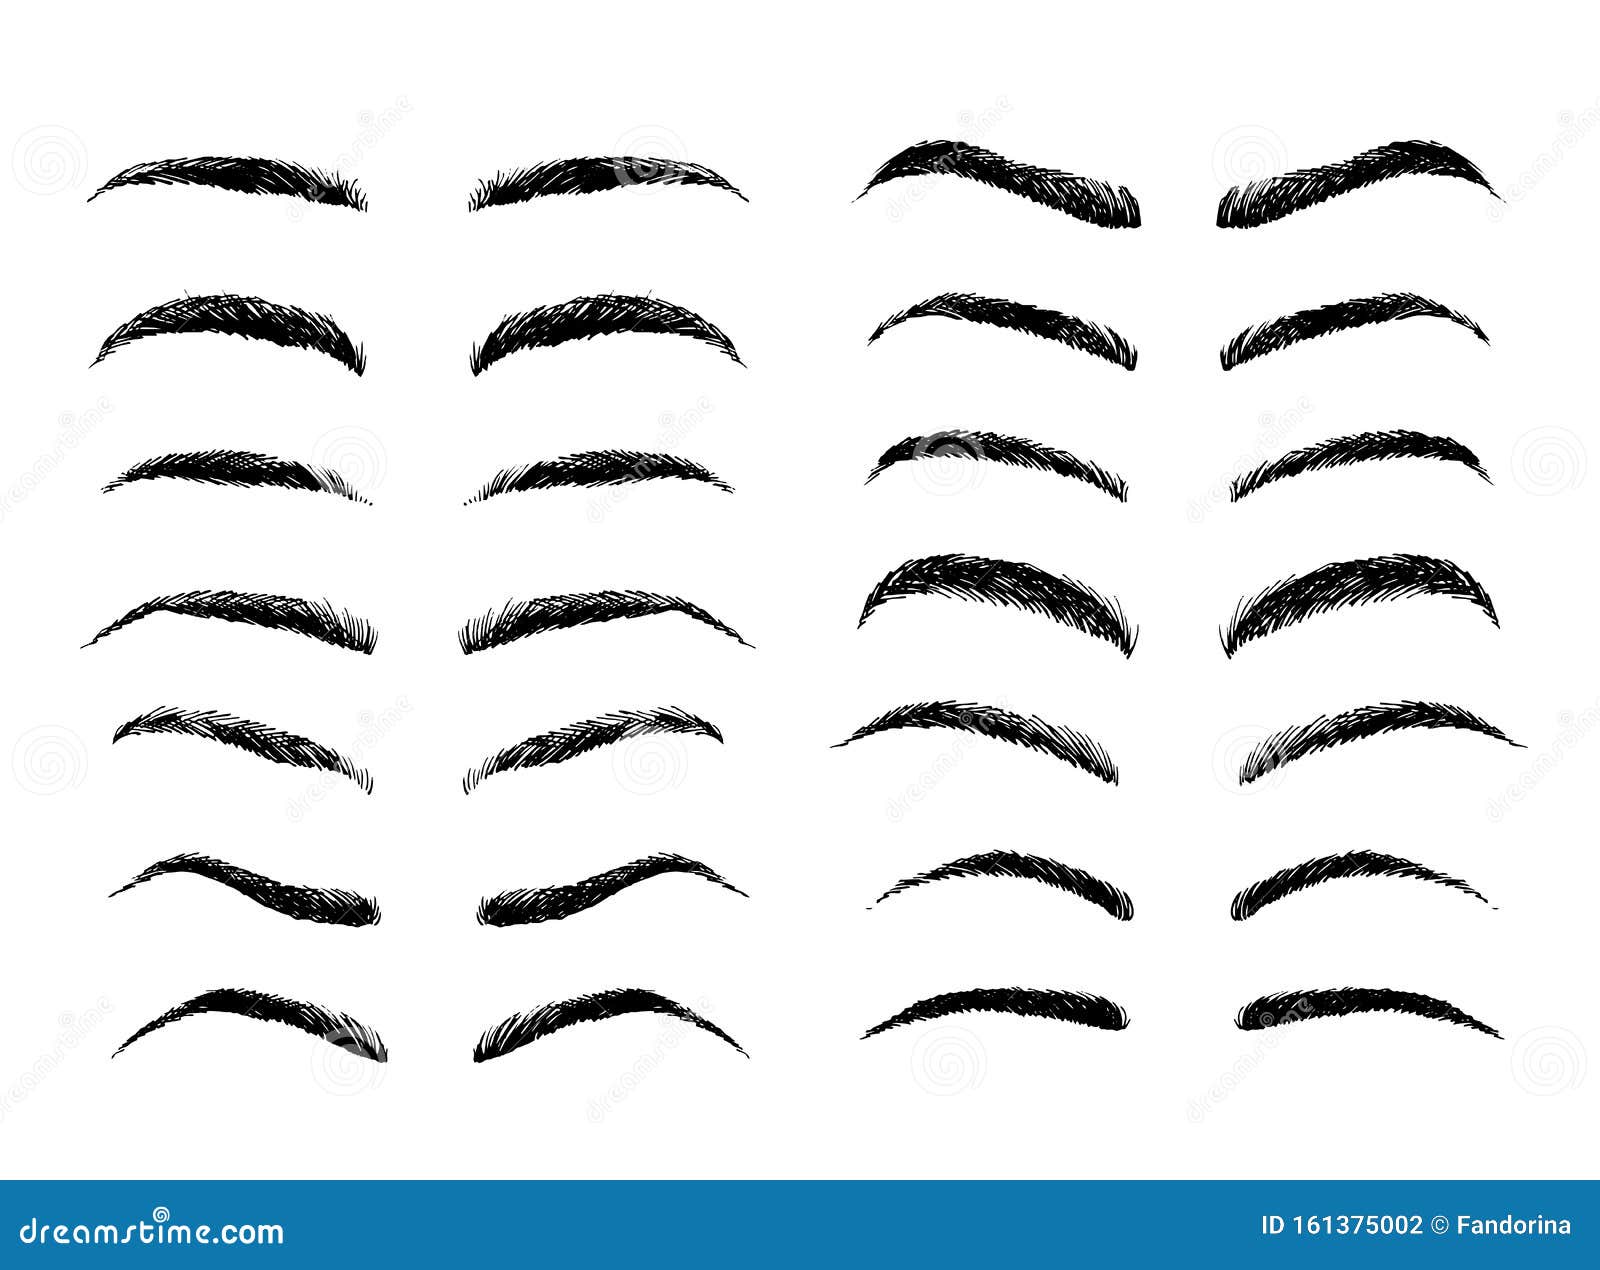 Eyebrows shapes vector set stock vector. Illustration of classic ...